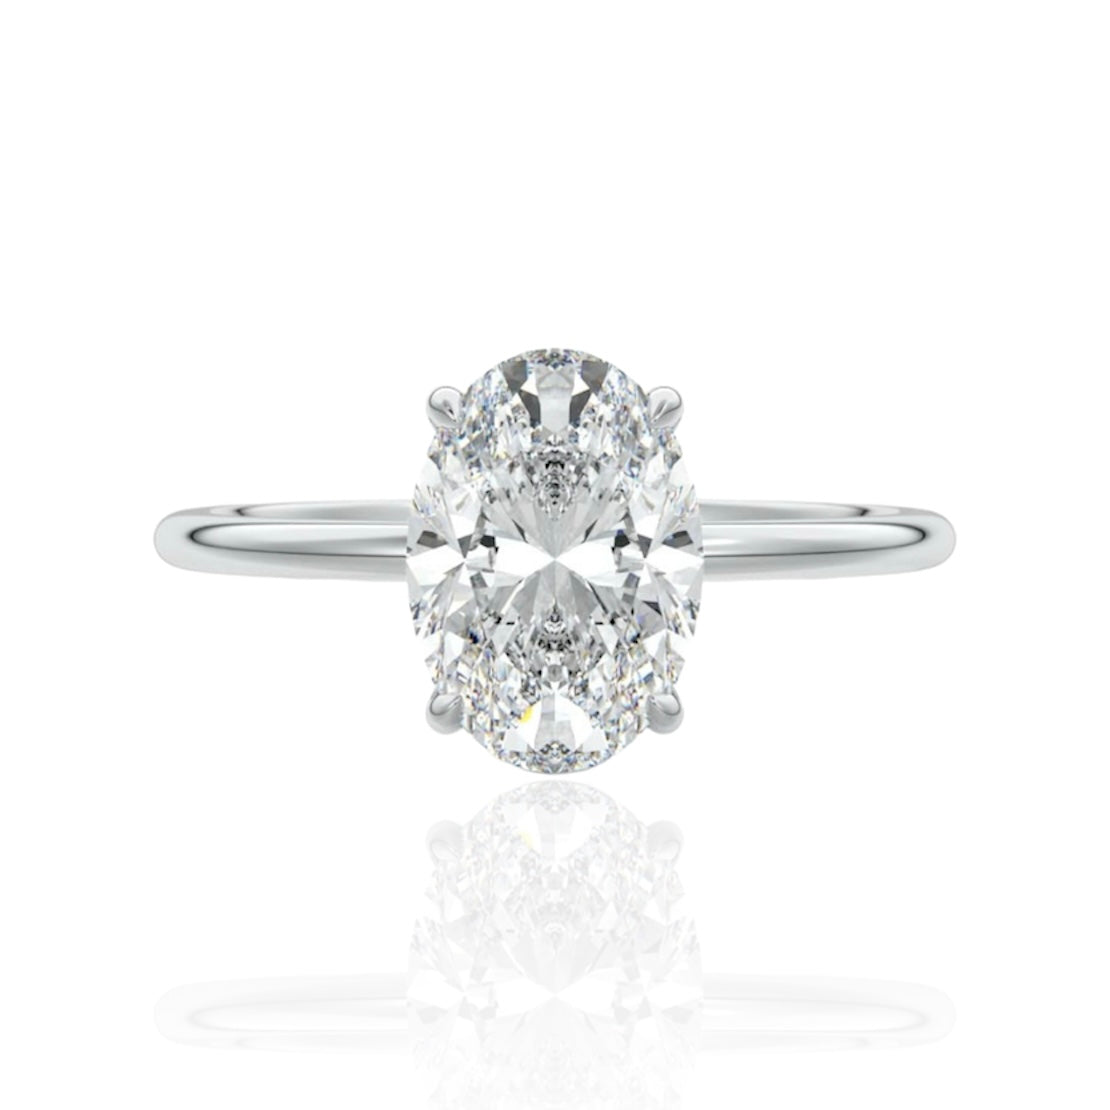 BLAIR SILVER SOLITAIRE RING